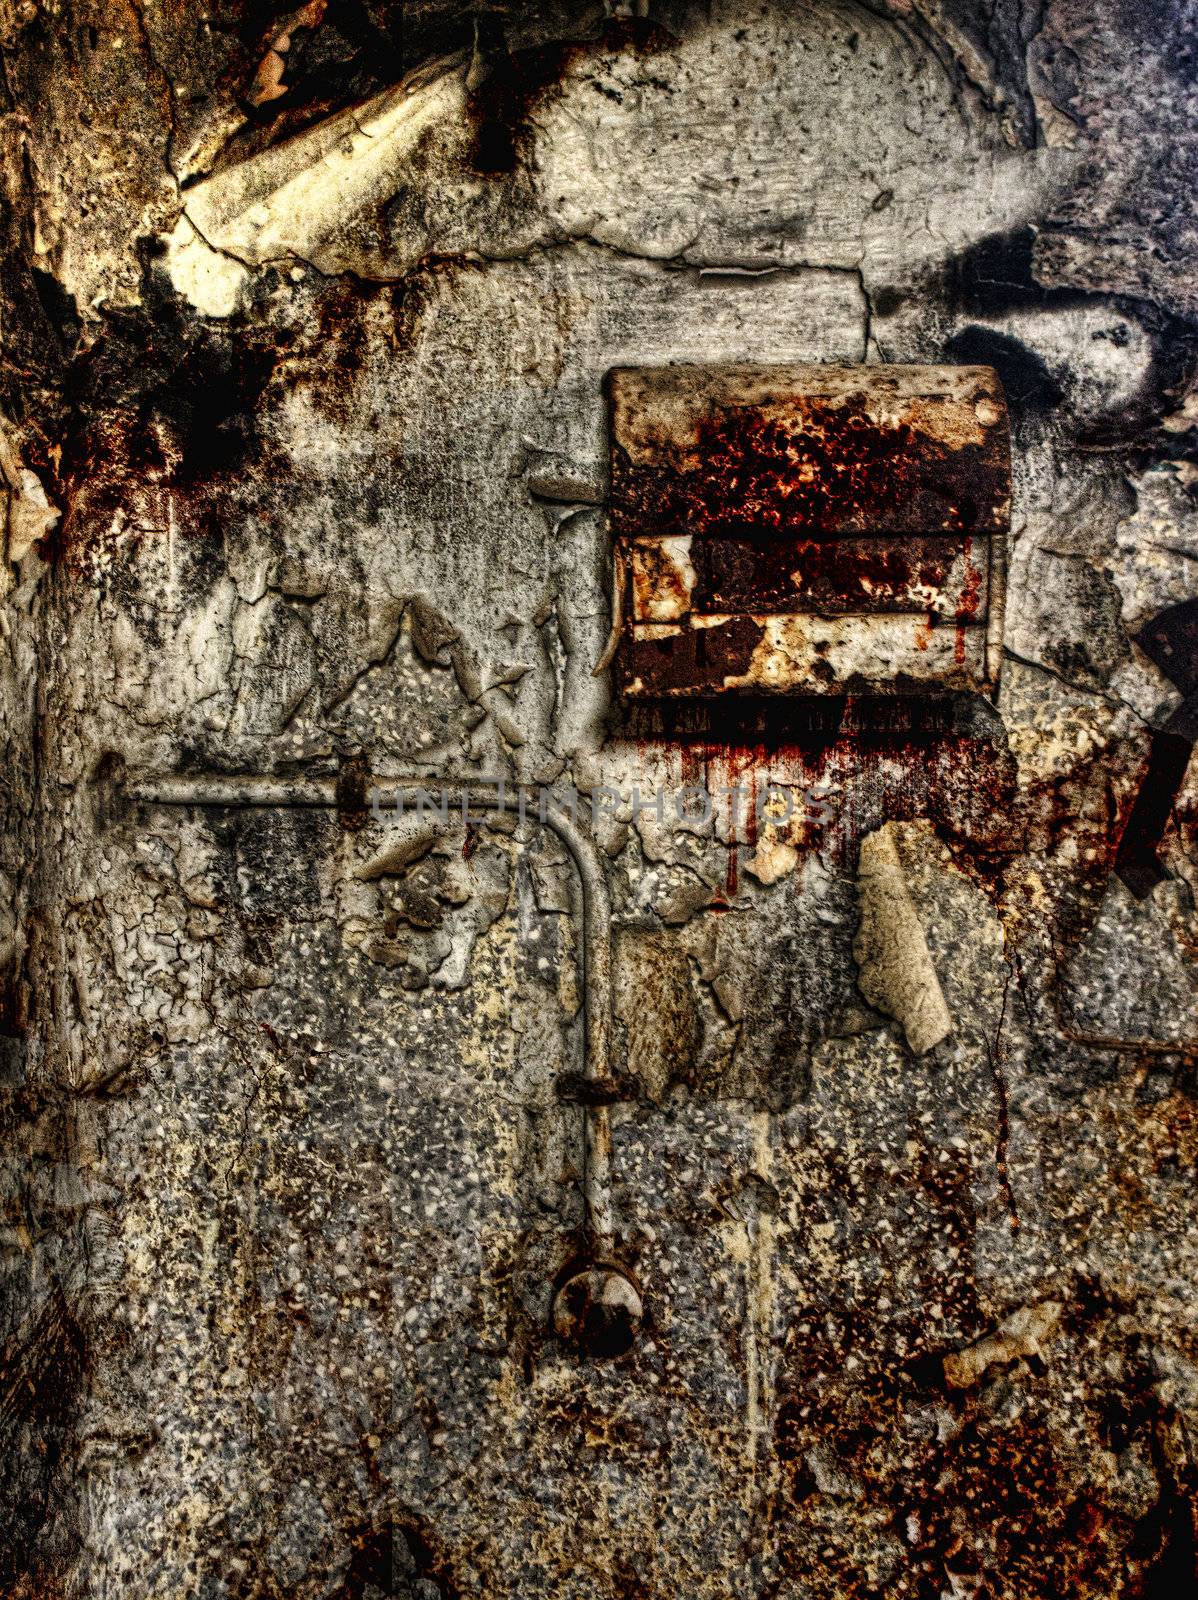 HDR image of an old bathroom wall and paper dispenser